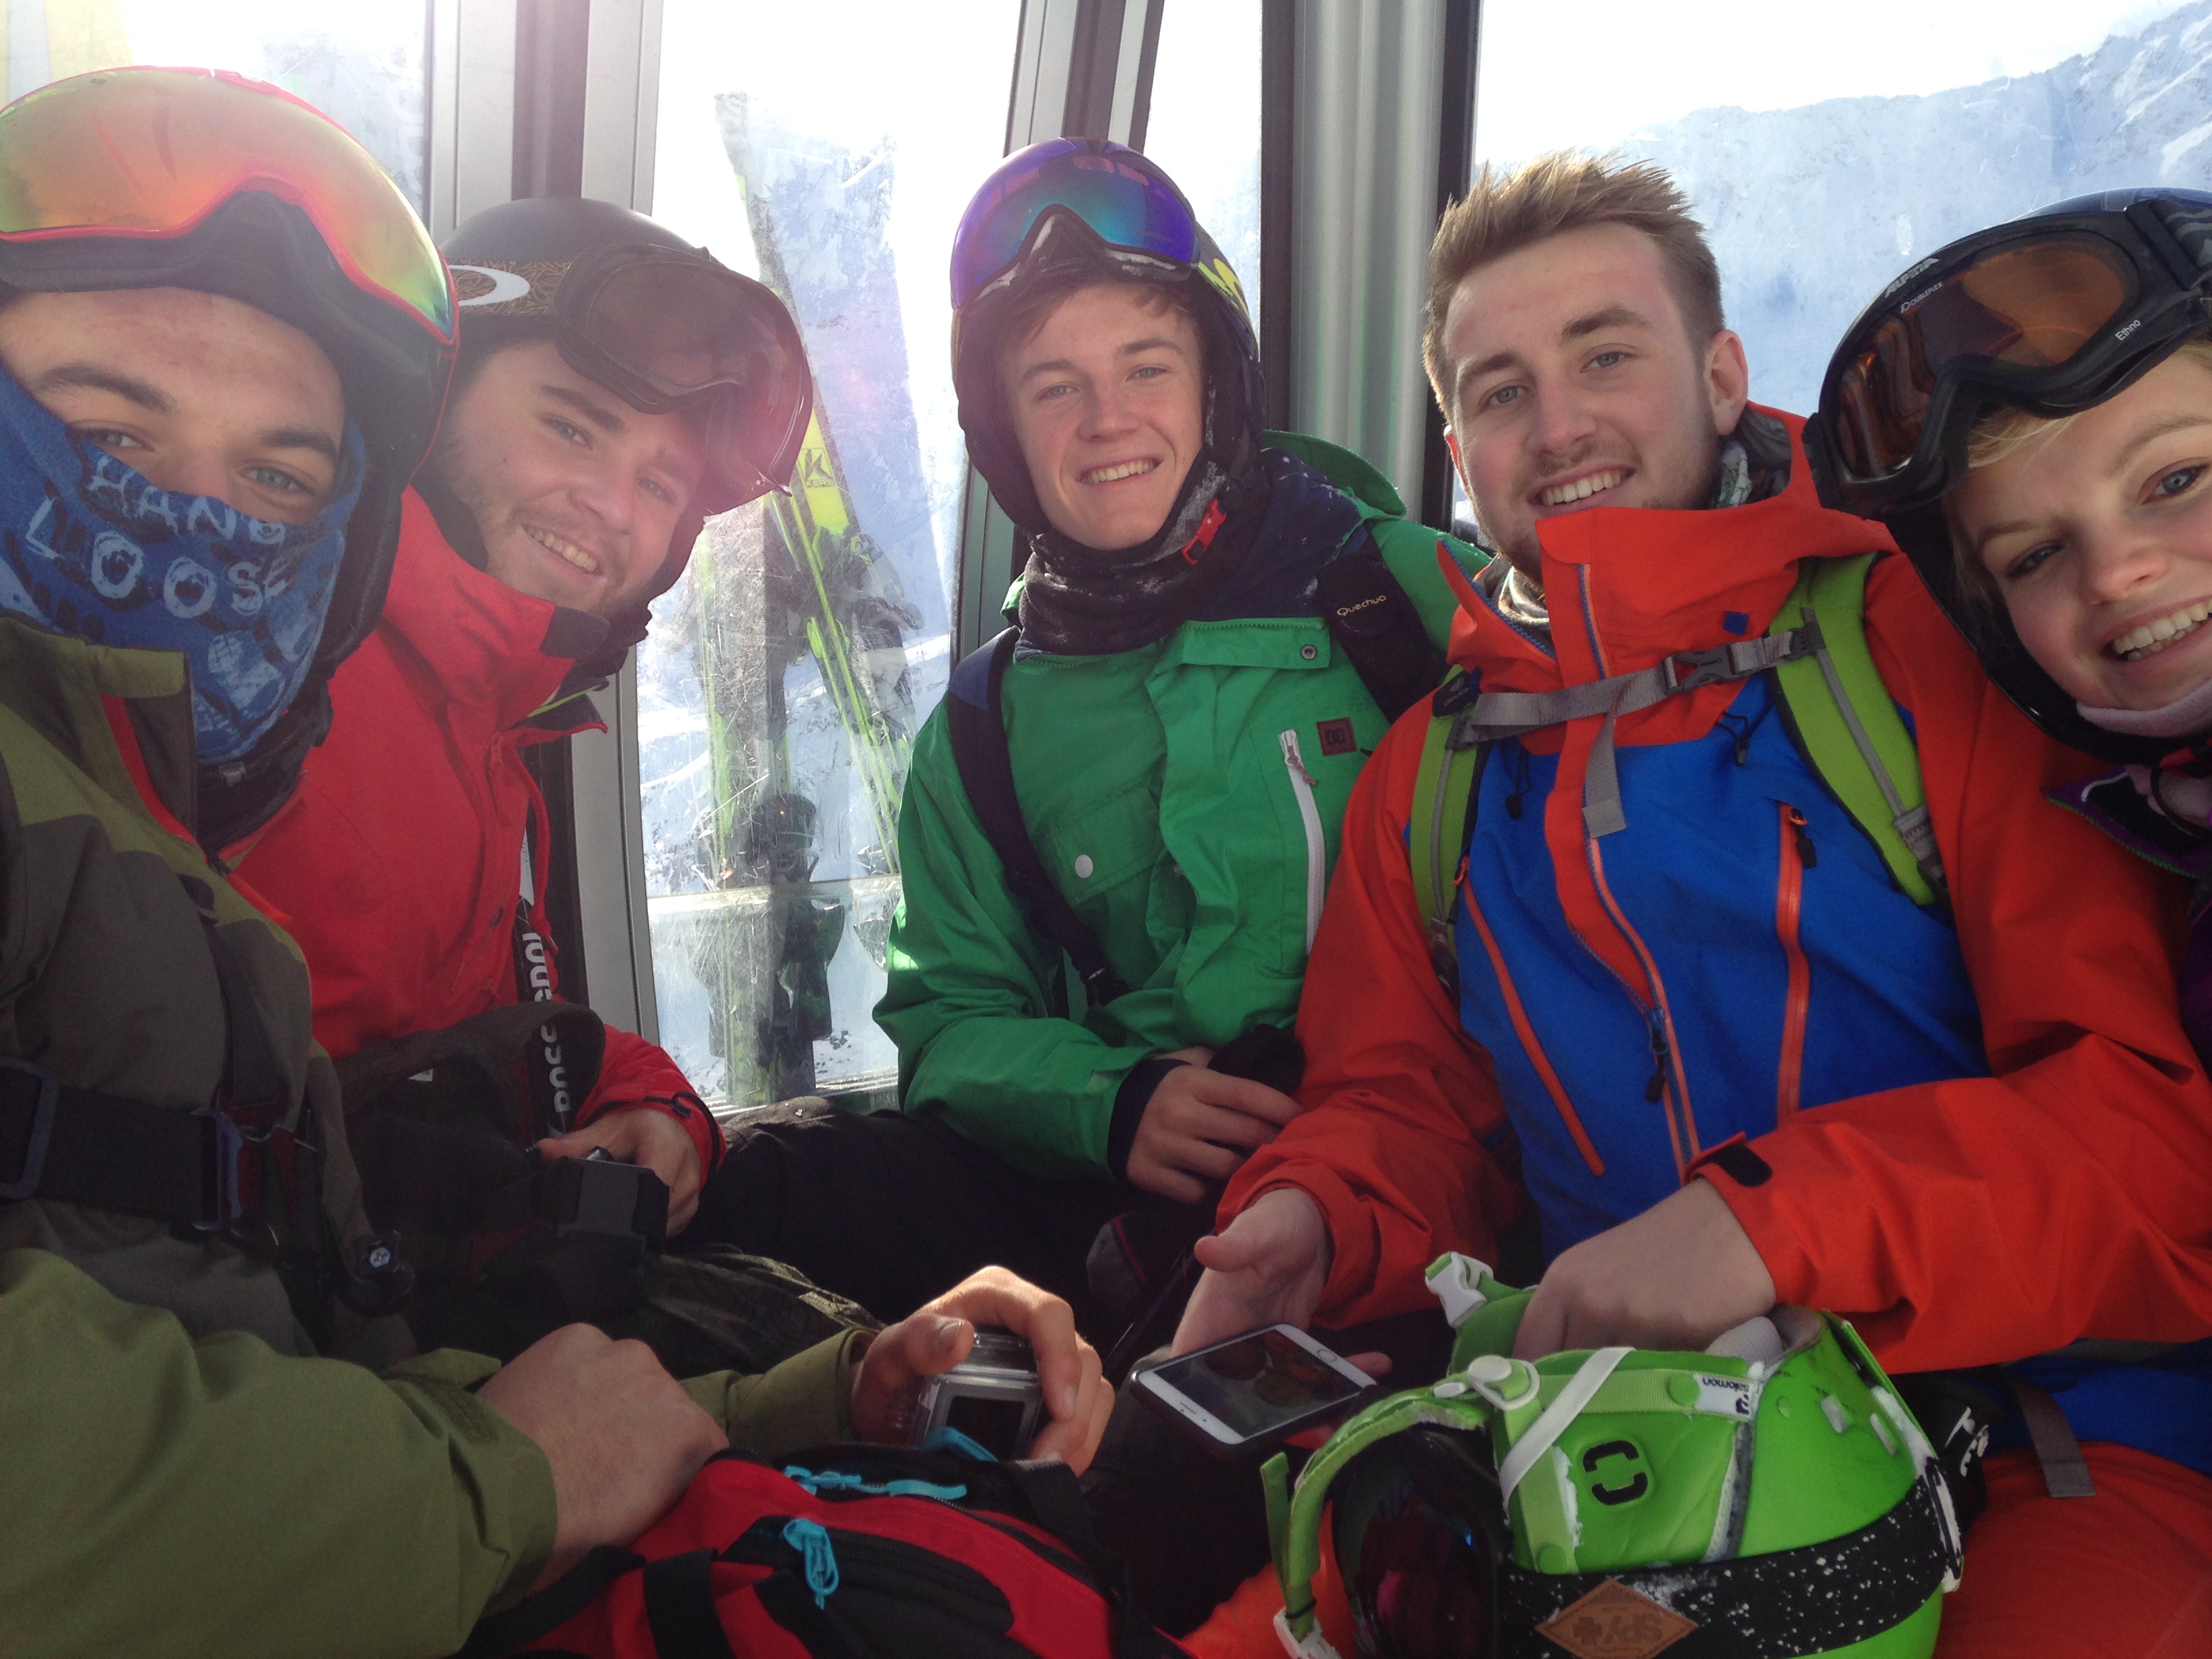 ST ANTON 4 WEEK SKI INSTRUCTOR COURSE 2015: BLUEBIRD SKIING, BOWLING, AND THE BEACH BOYS